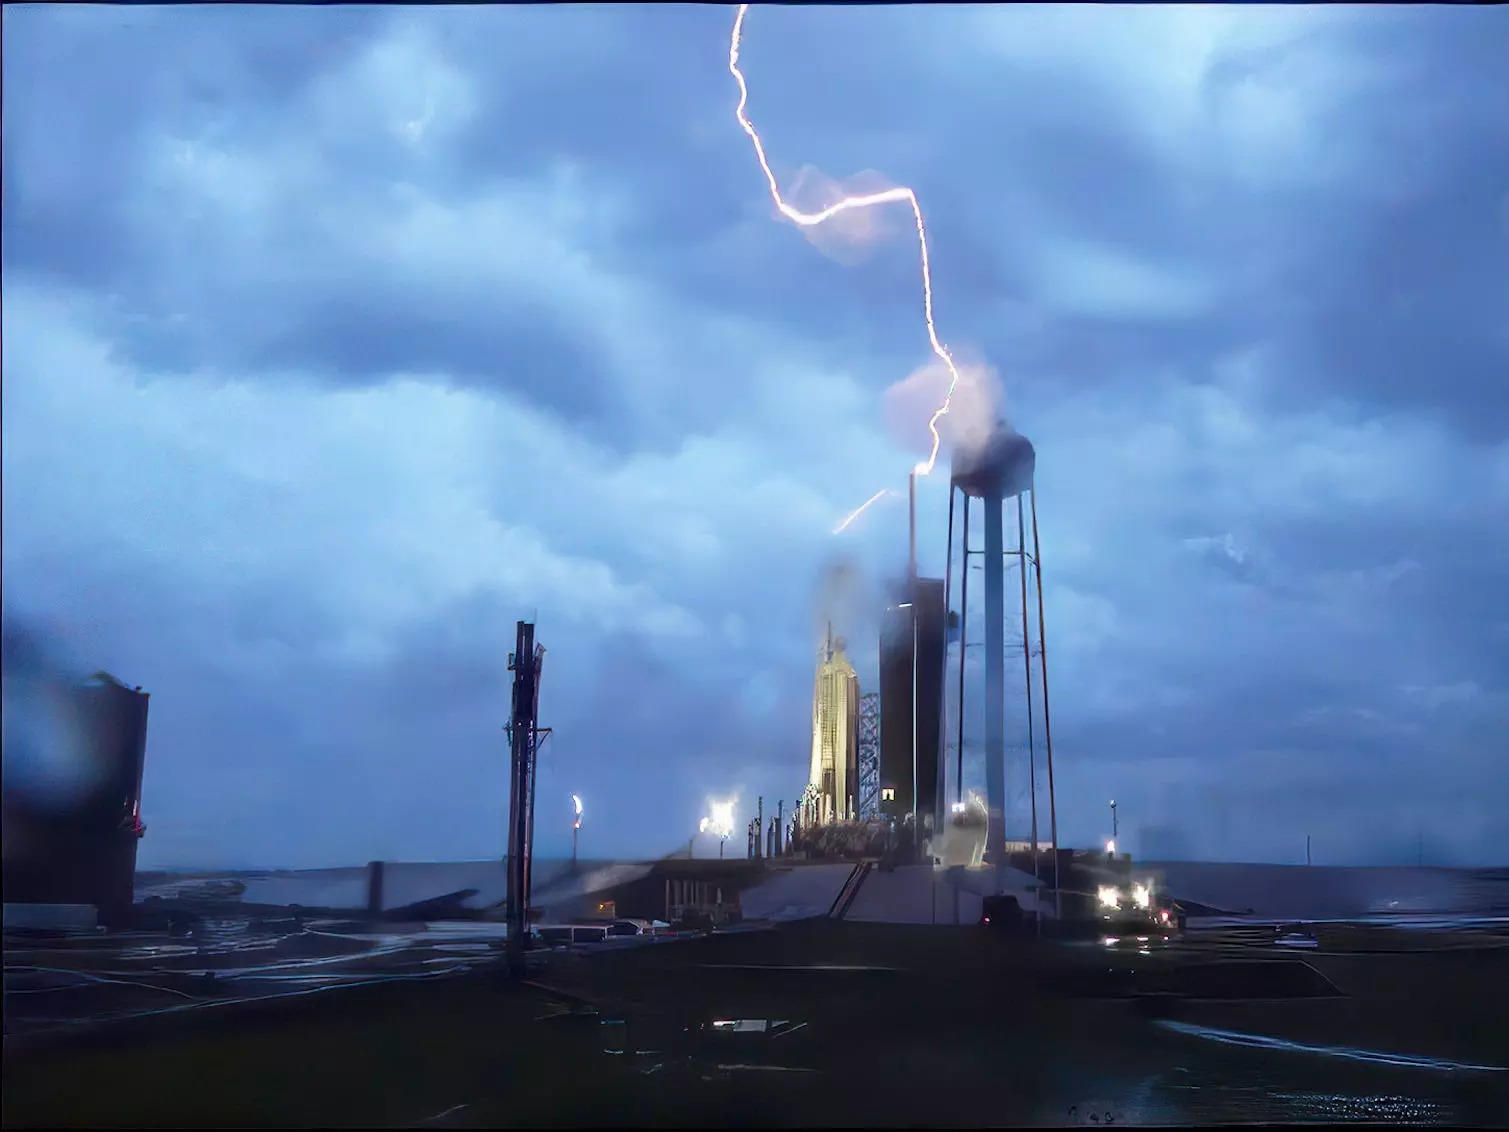 A picture shows Falcon Heavy on its launchpad. A bolt of lightning hits both its dfelctor tower and the rocket.